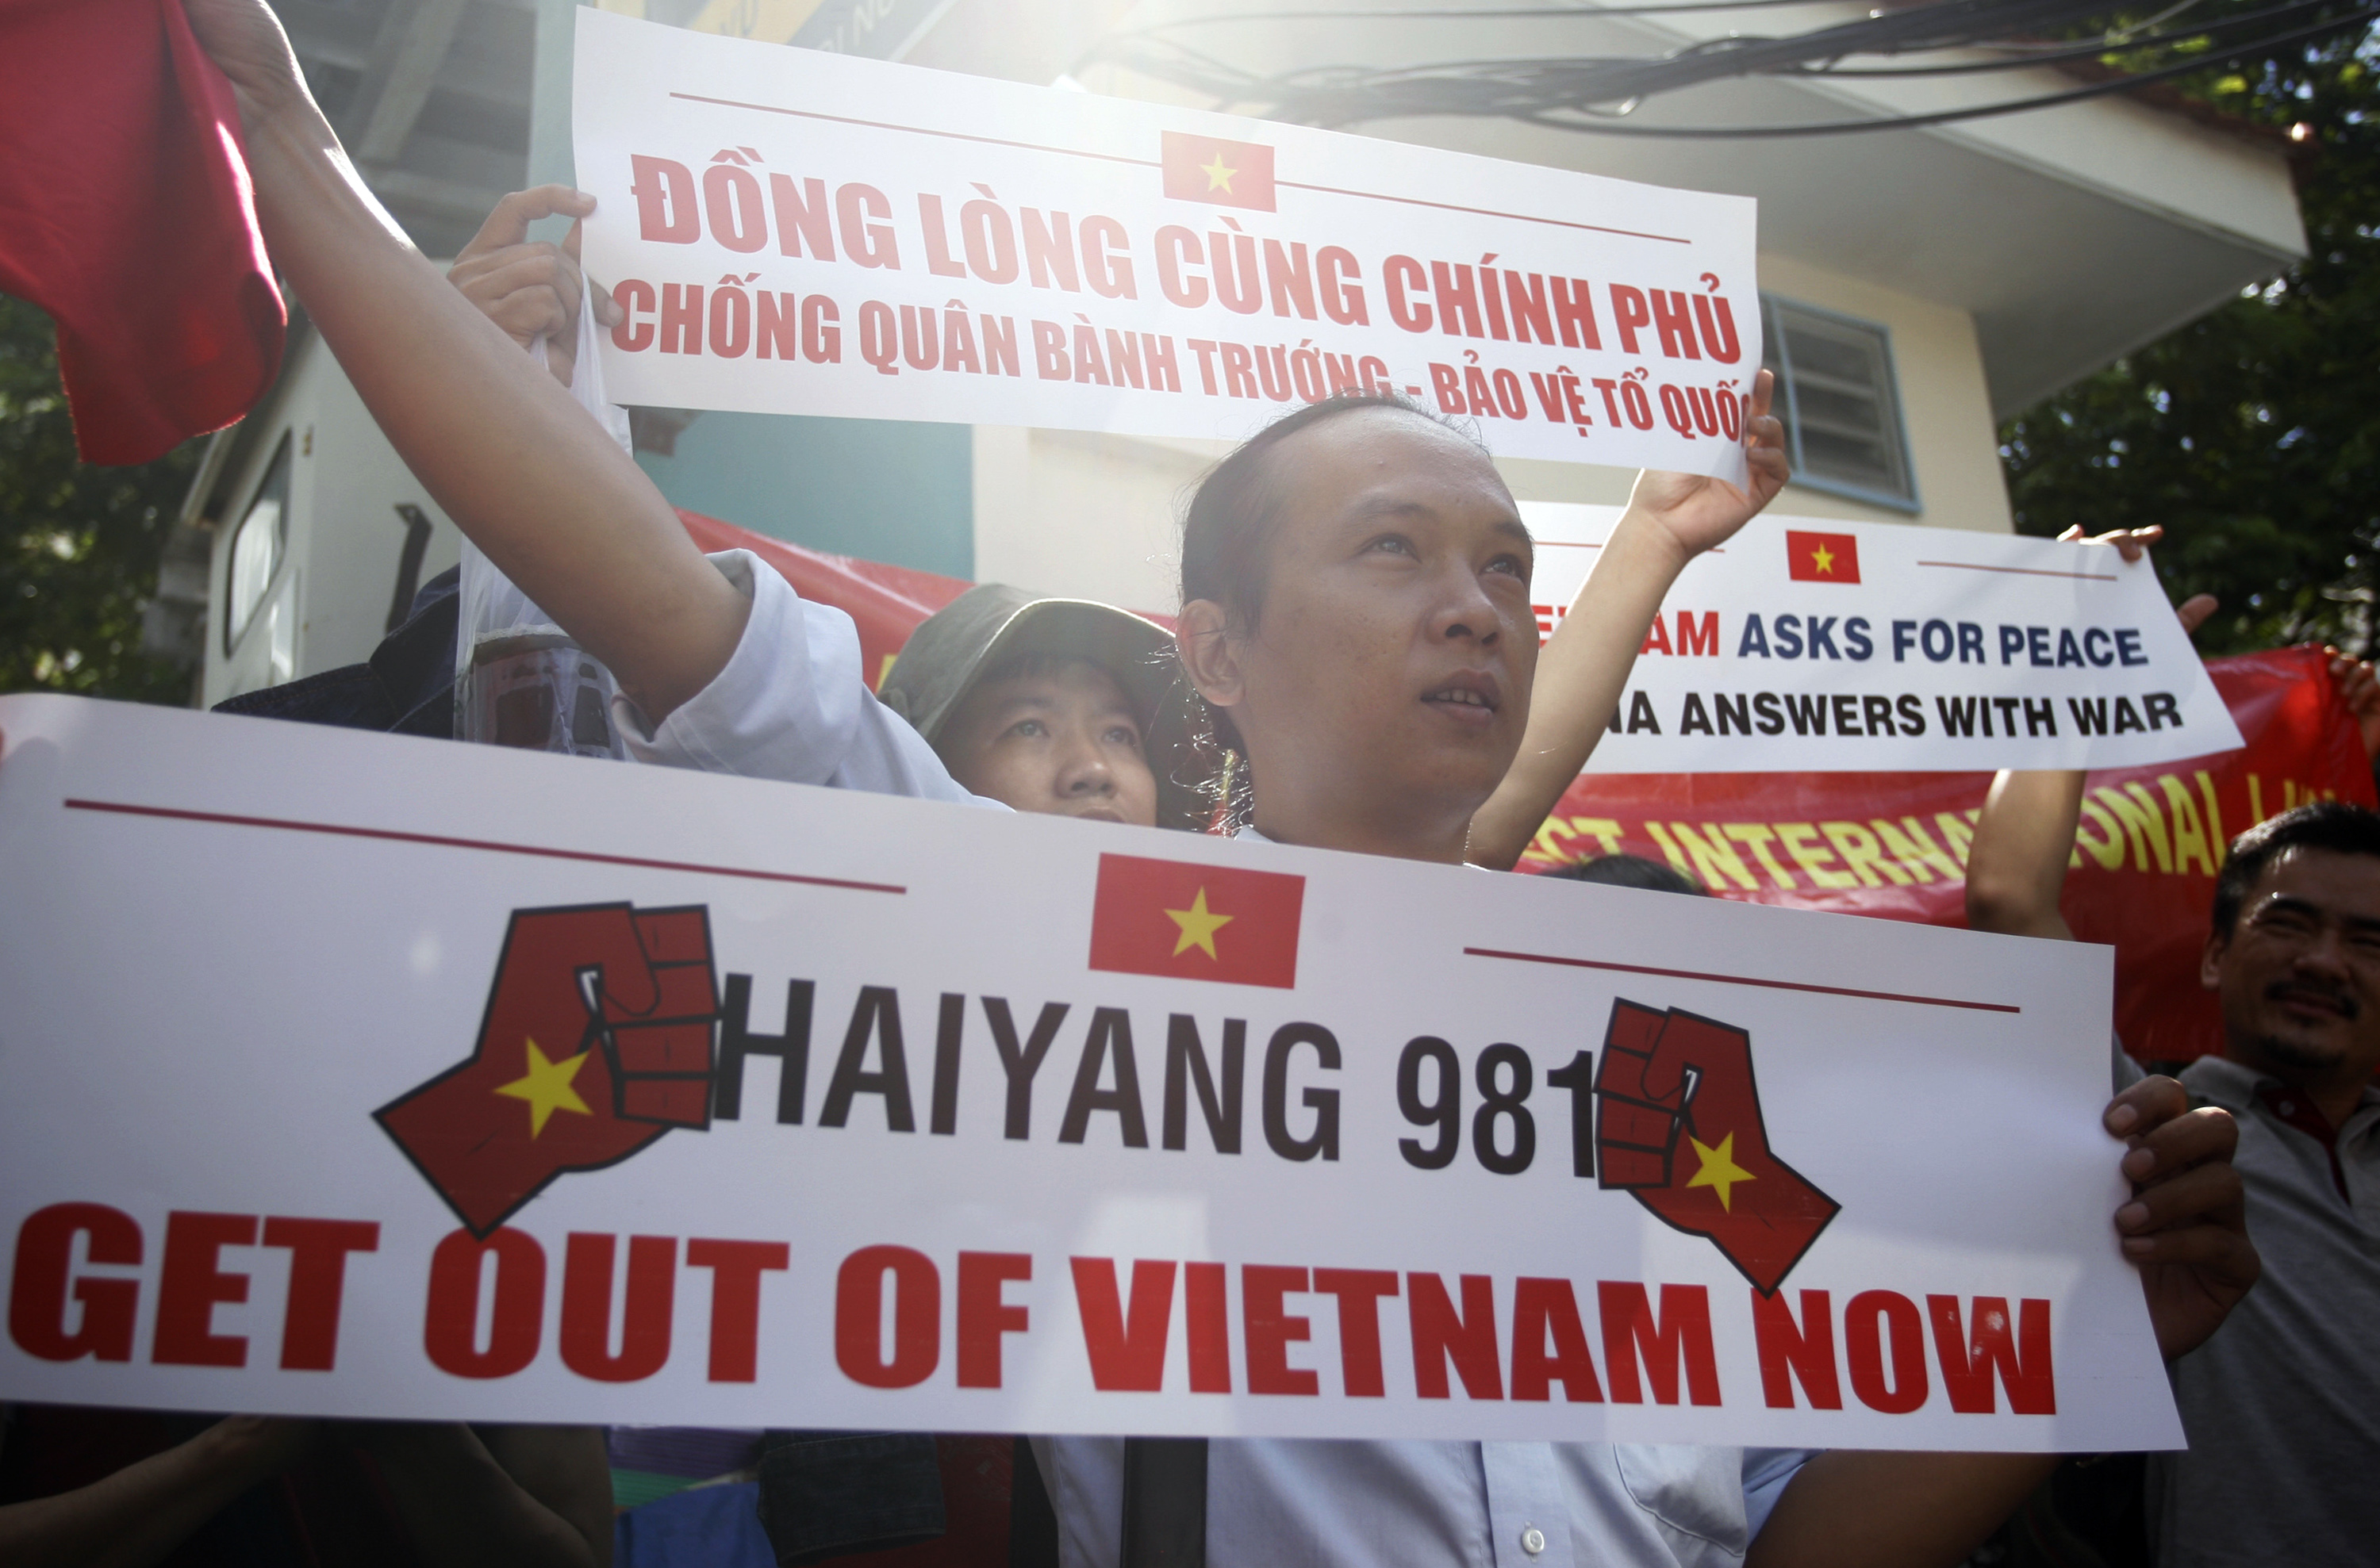 Vietnamese protest against China’s deployment of an oil rig in the disputed South China Sea in front of the Chinese Consulate in Ho Chi Minh City on Saturday, May 10, 2014. (Associated Press)